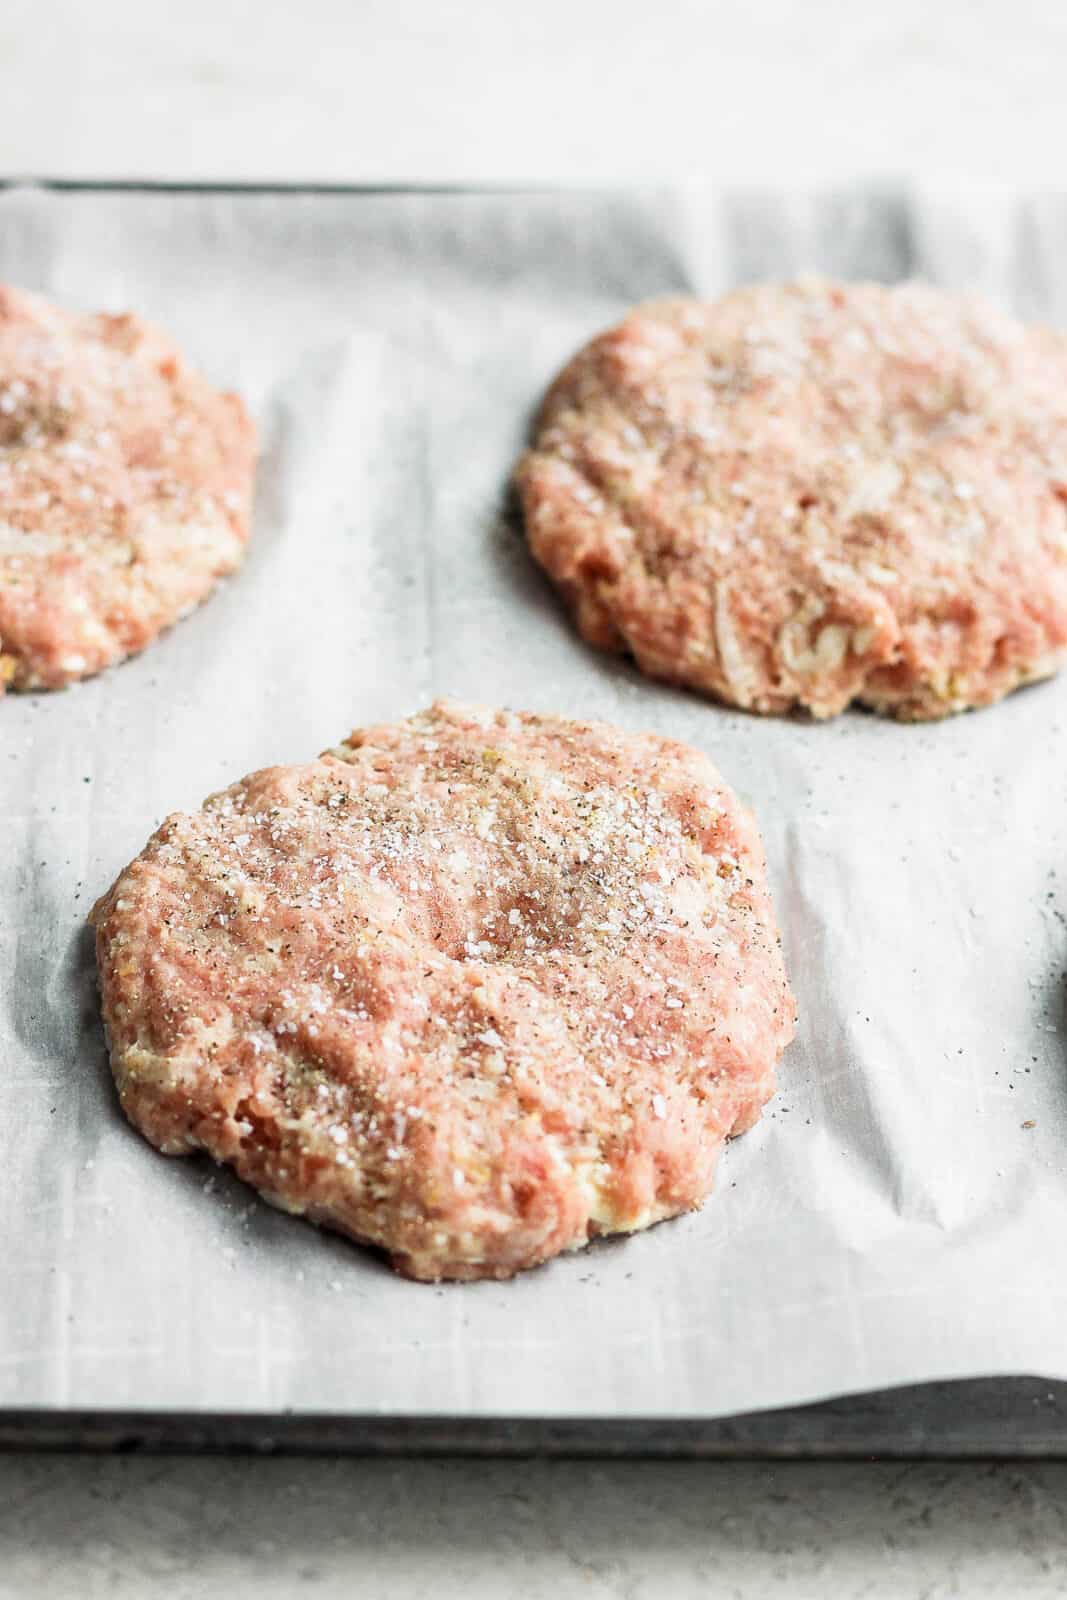 Turkey patties on a parchment-lined baking sheet and seasoned with salt and pepper.